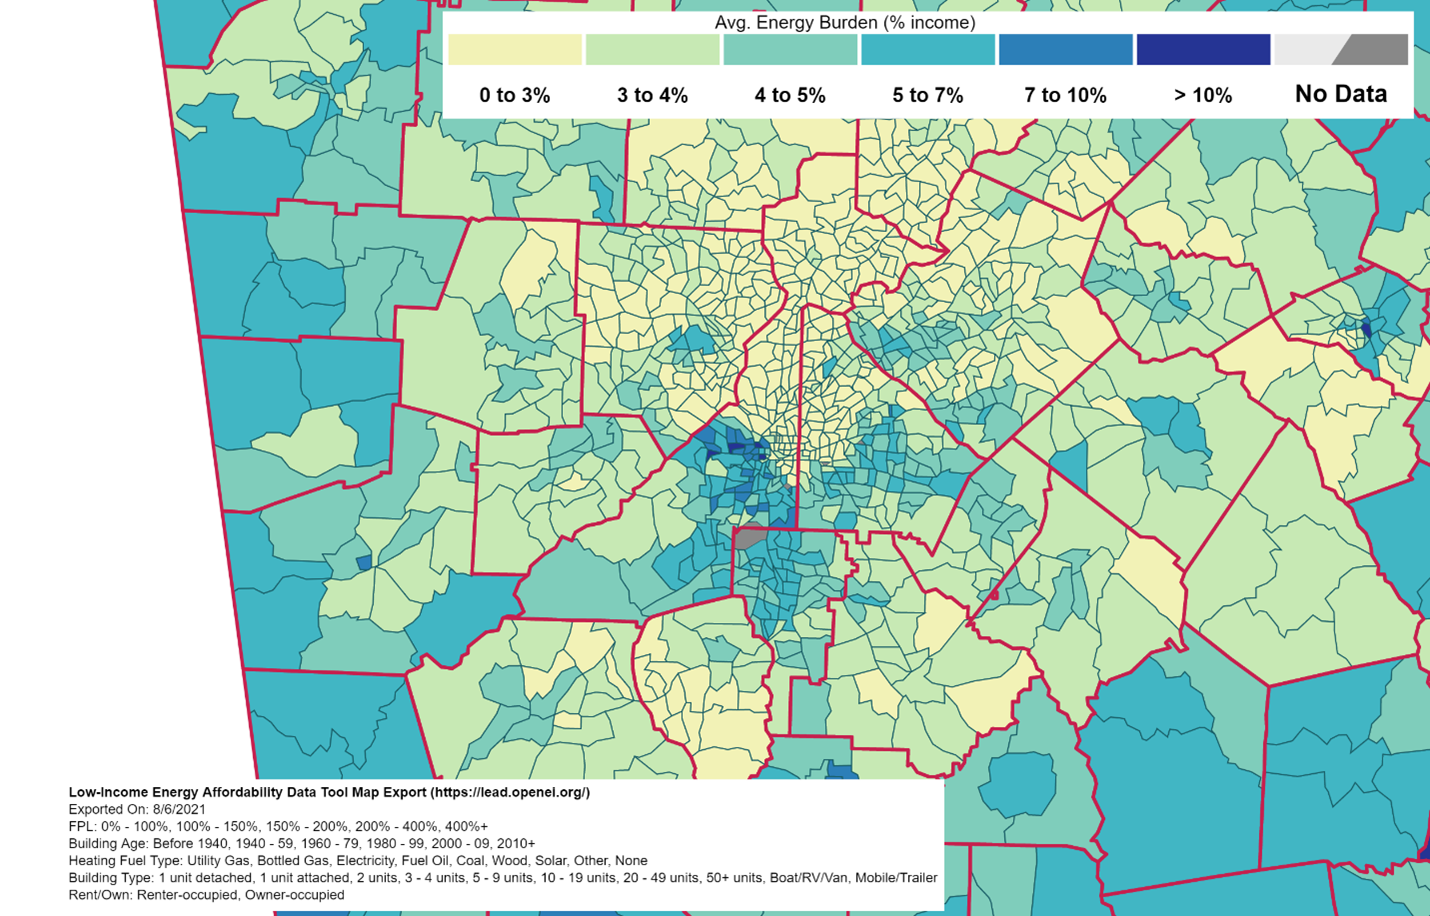 Map showing Average Energy Burden as a percentage of household income for Census tracts in the Atlanta region. 